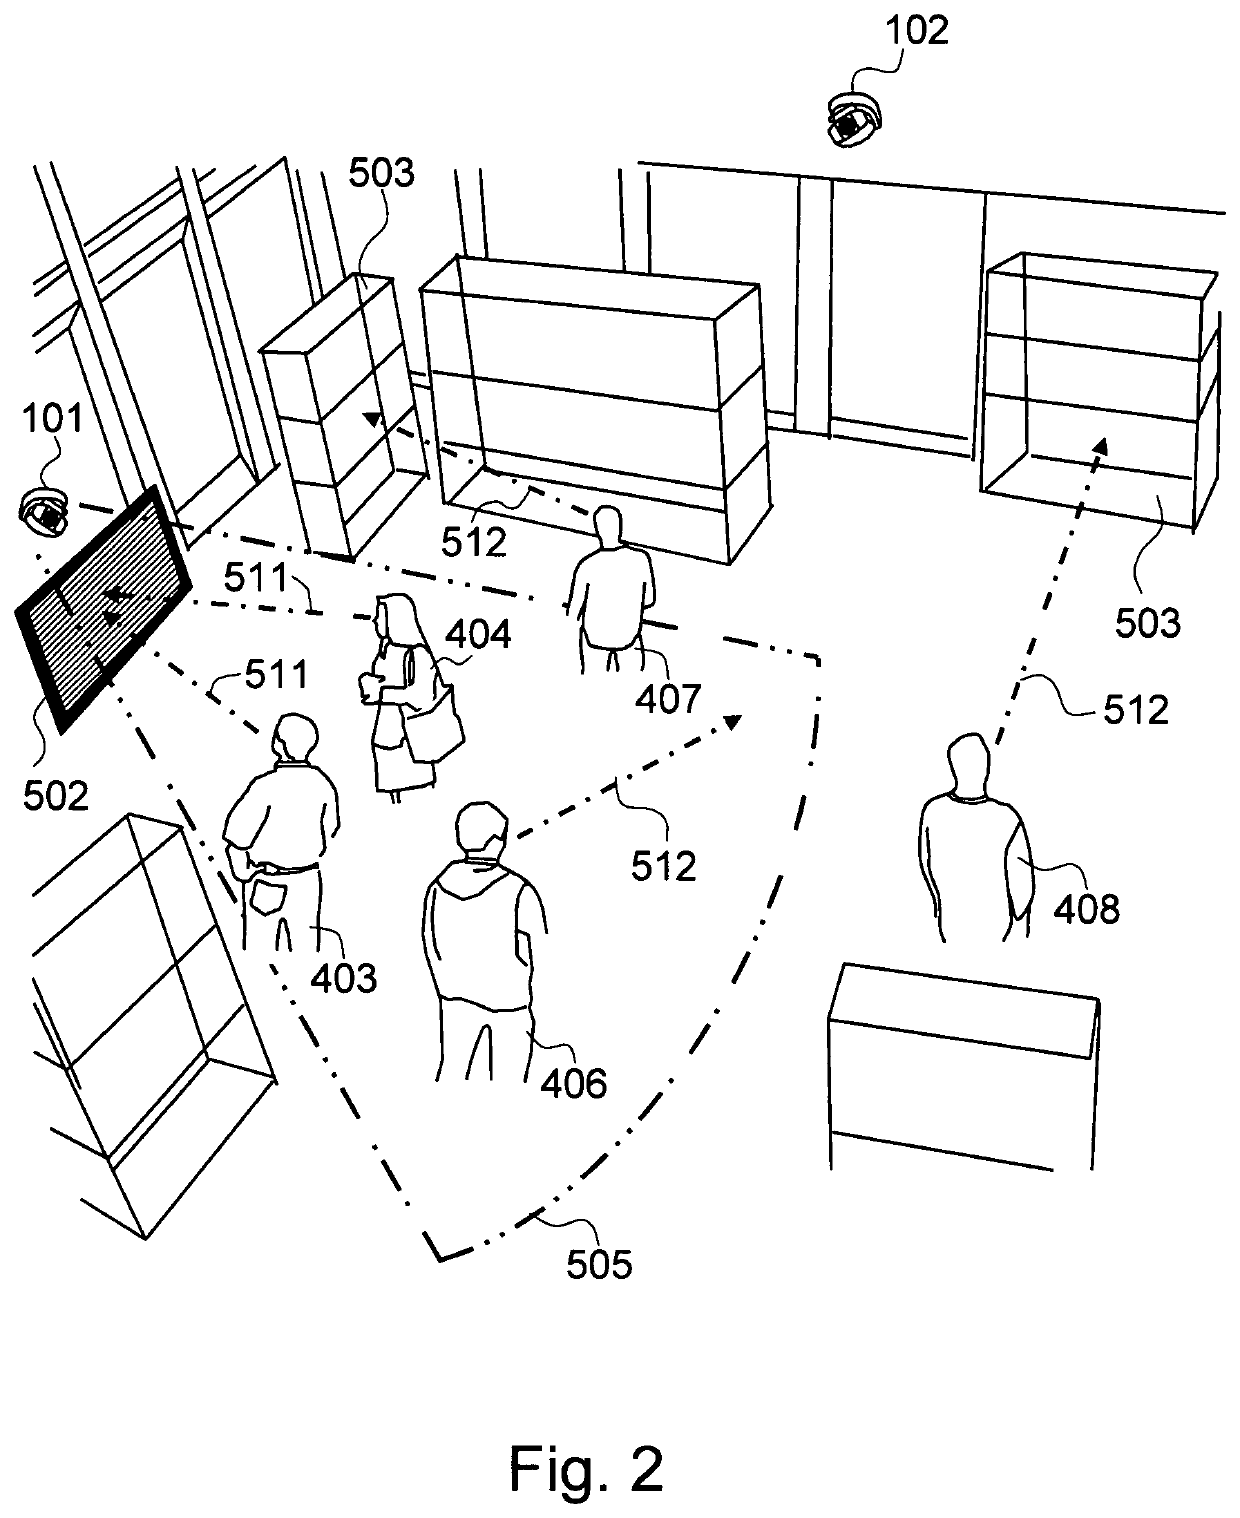 Method and system for measuring viewership of people for displayed object